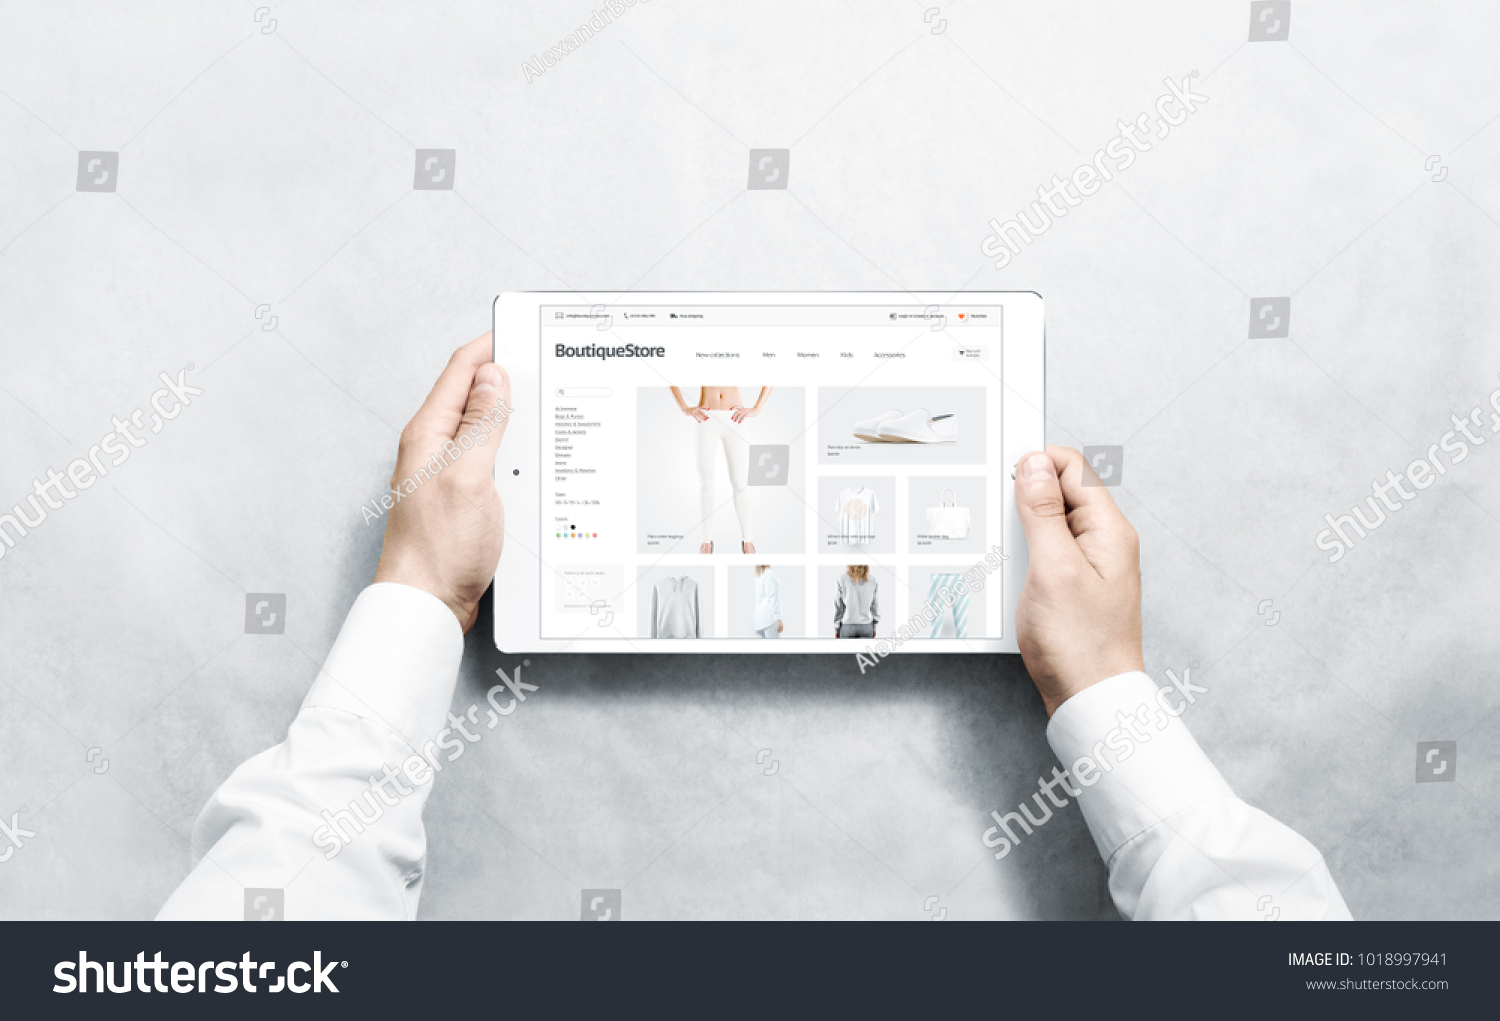 Hands holding tablet with fashion webstore mock up on screen, isolated. Clothing web page interface mockup. Internet website online template on the device display. #1018997941